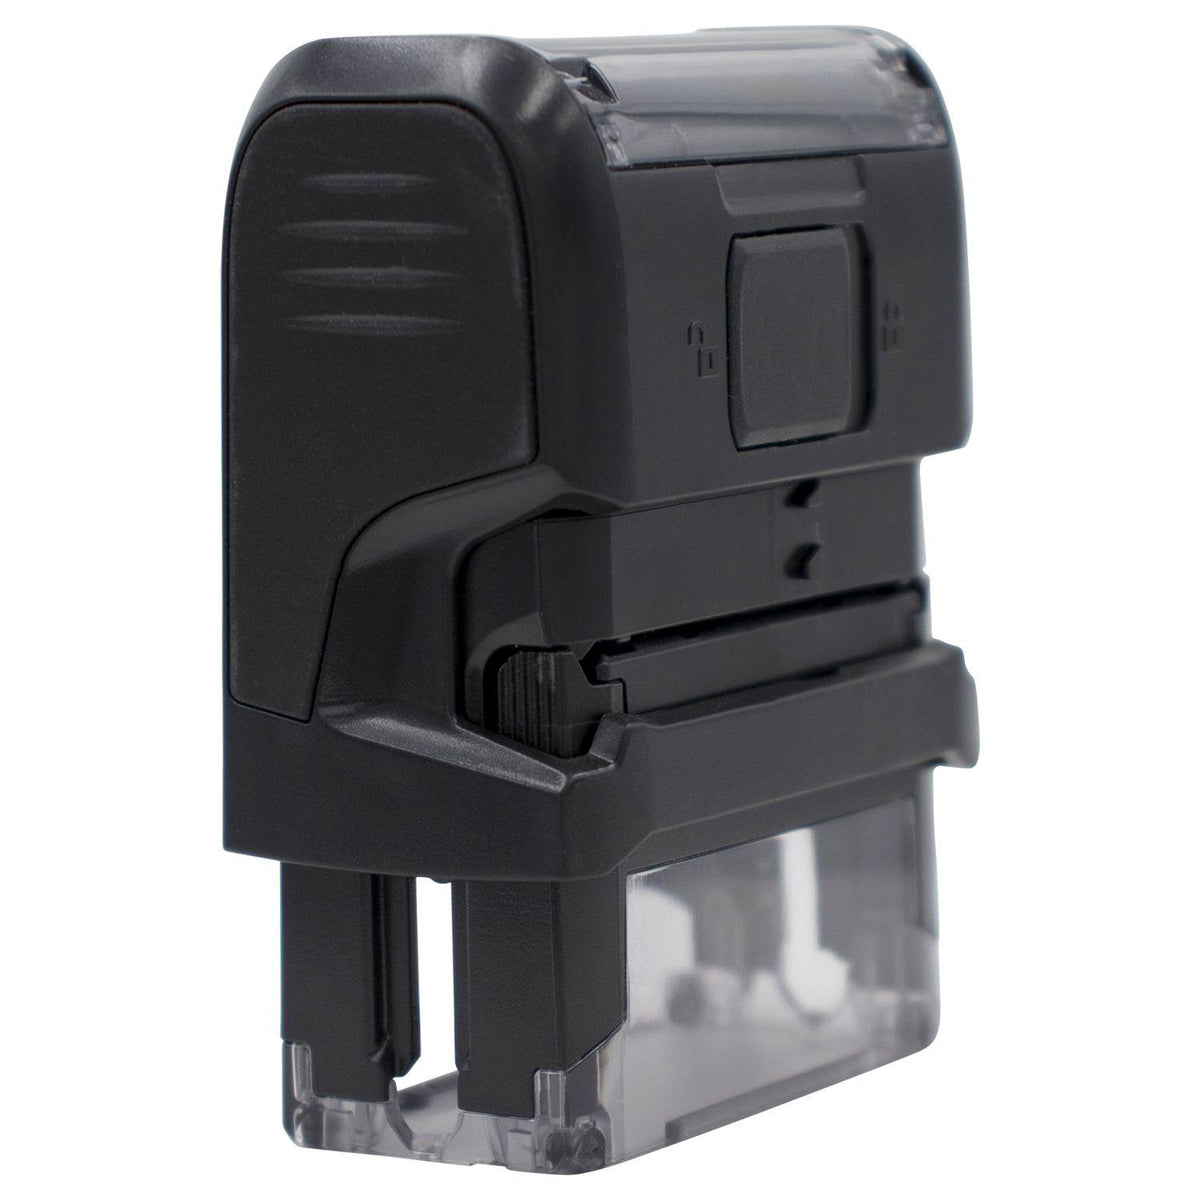 Large Self Inking Advanced Placement Stamp Back View